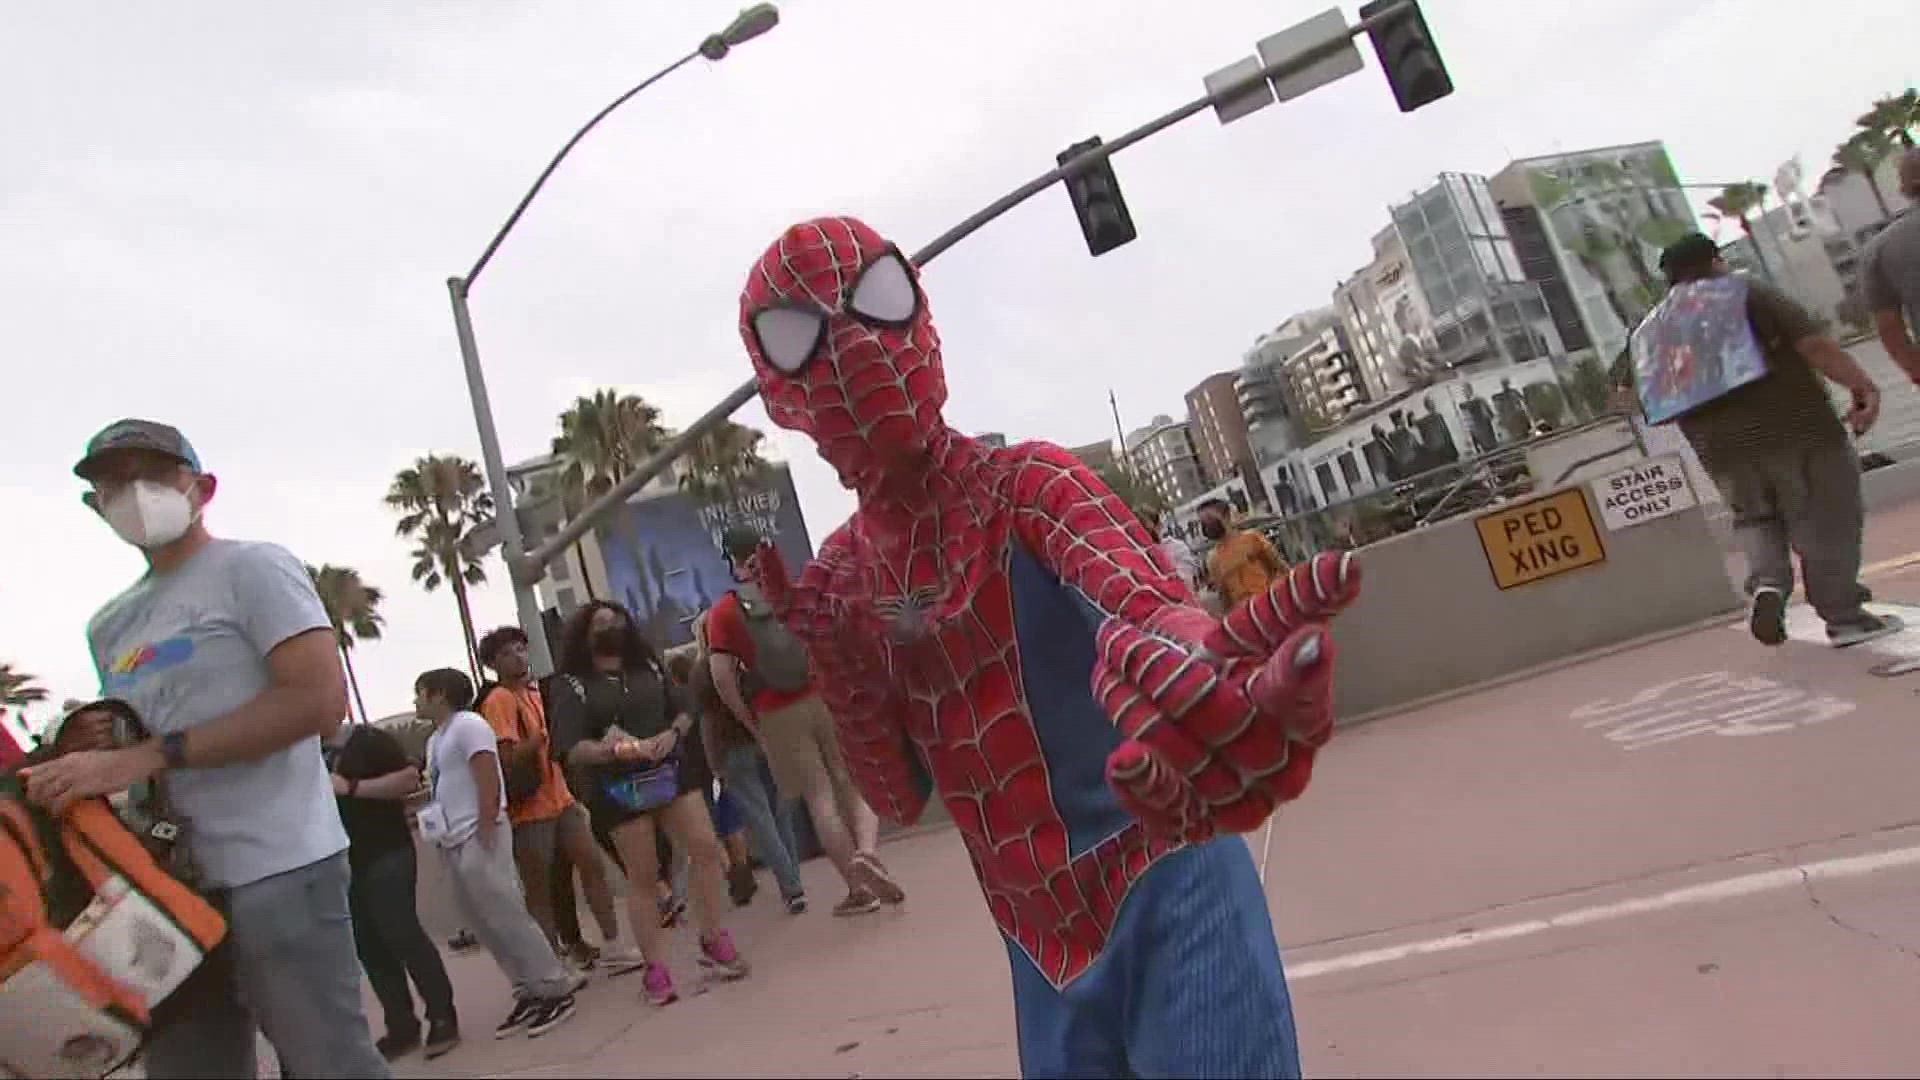 It's back! Comic-Con 2022 is happening this weekend in San Diego. Here's a sneak peek at what to expect from this year's big event.